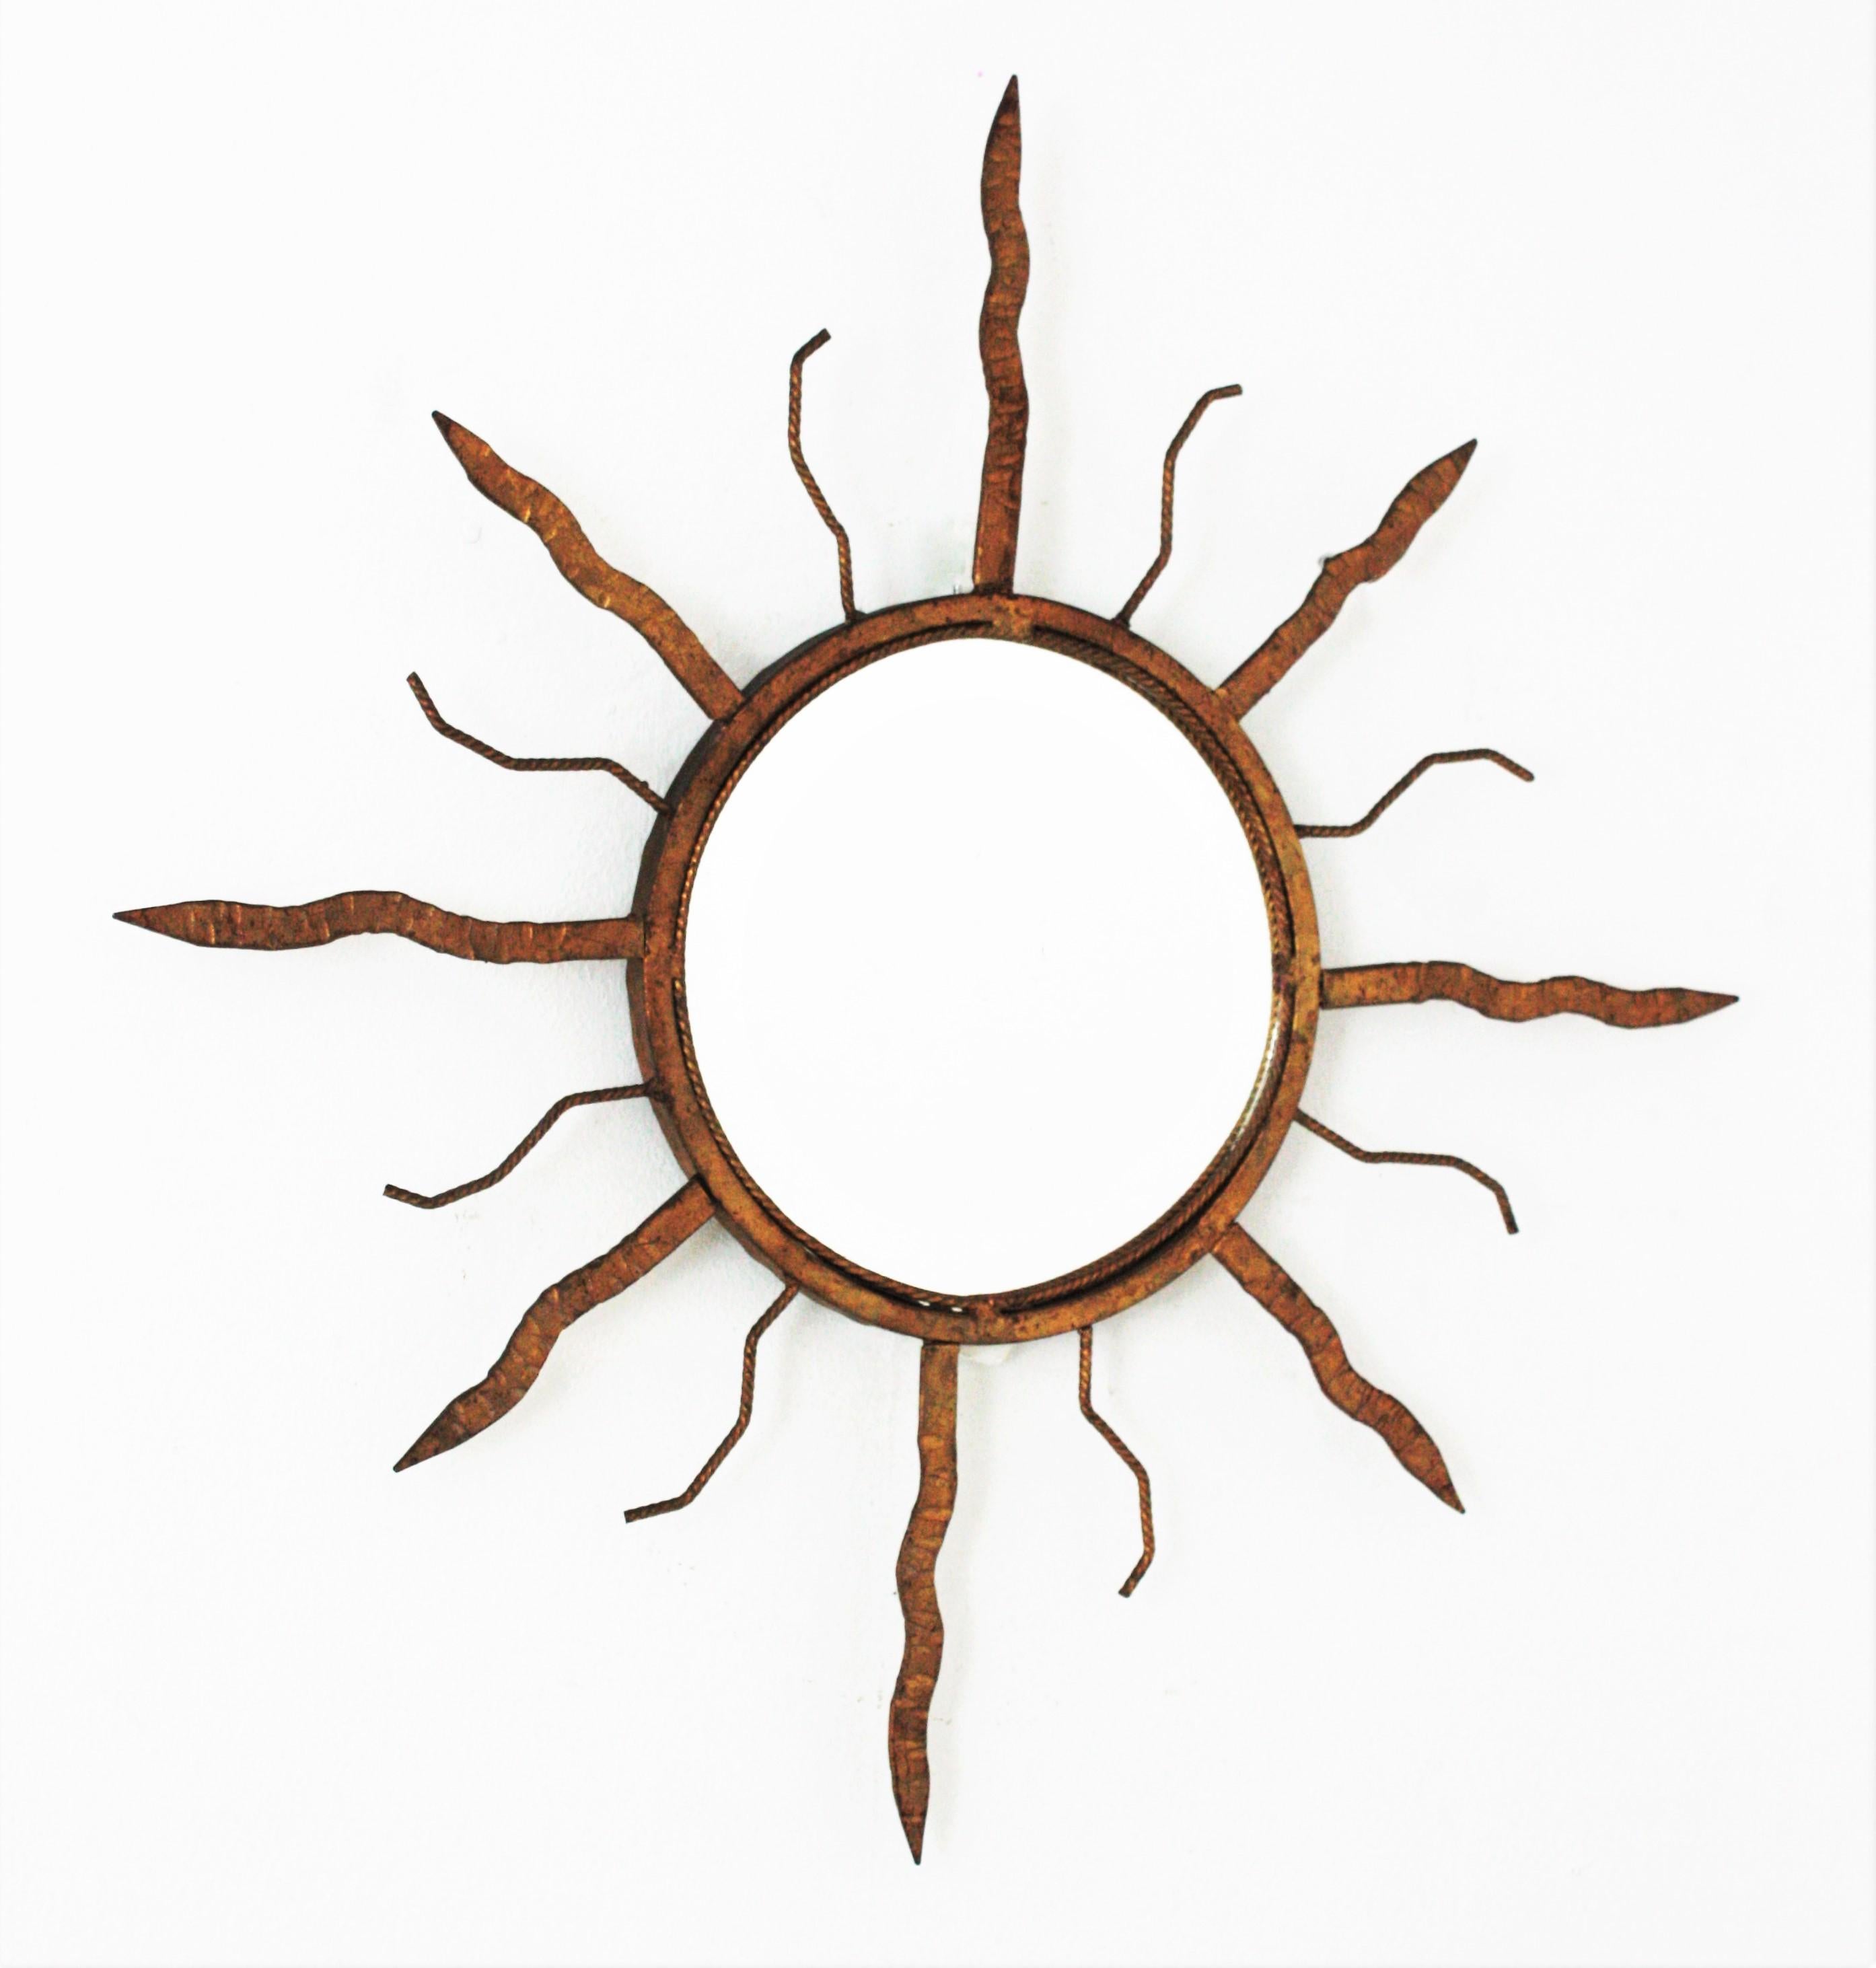 Hand forged iron sunburst mirror with gold leaf finish in the manner of Gilbert Poillerat, France, 1940s-1950s
This eye-catching wrought iron sunburst mirror manufactured at the mid-20th century period. Its design is clearly inspired by those